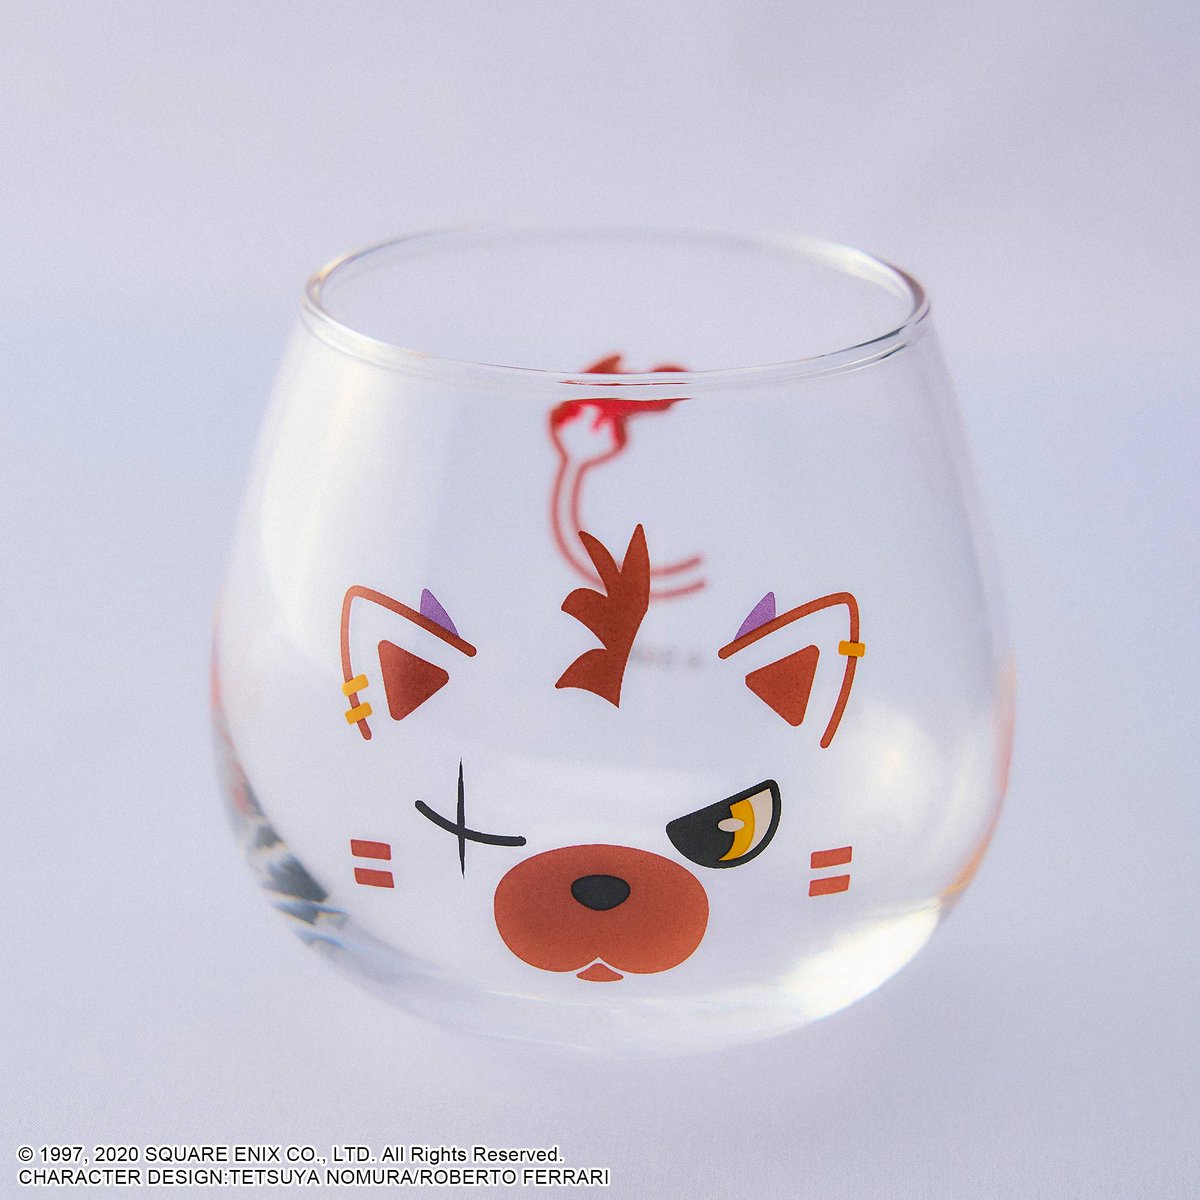 「Red XIII glass (Final Fantasy VII) #ad 」|THE ART OF VIDEO GAMESのイラスト